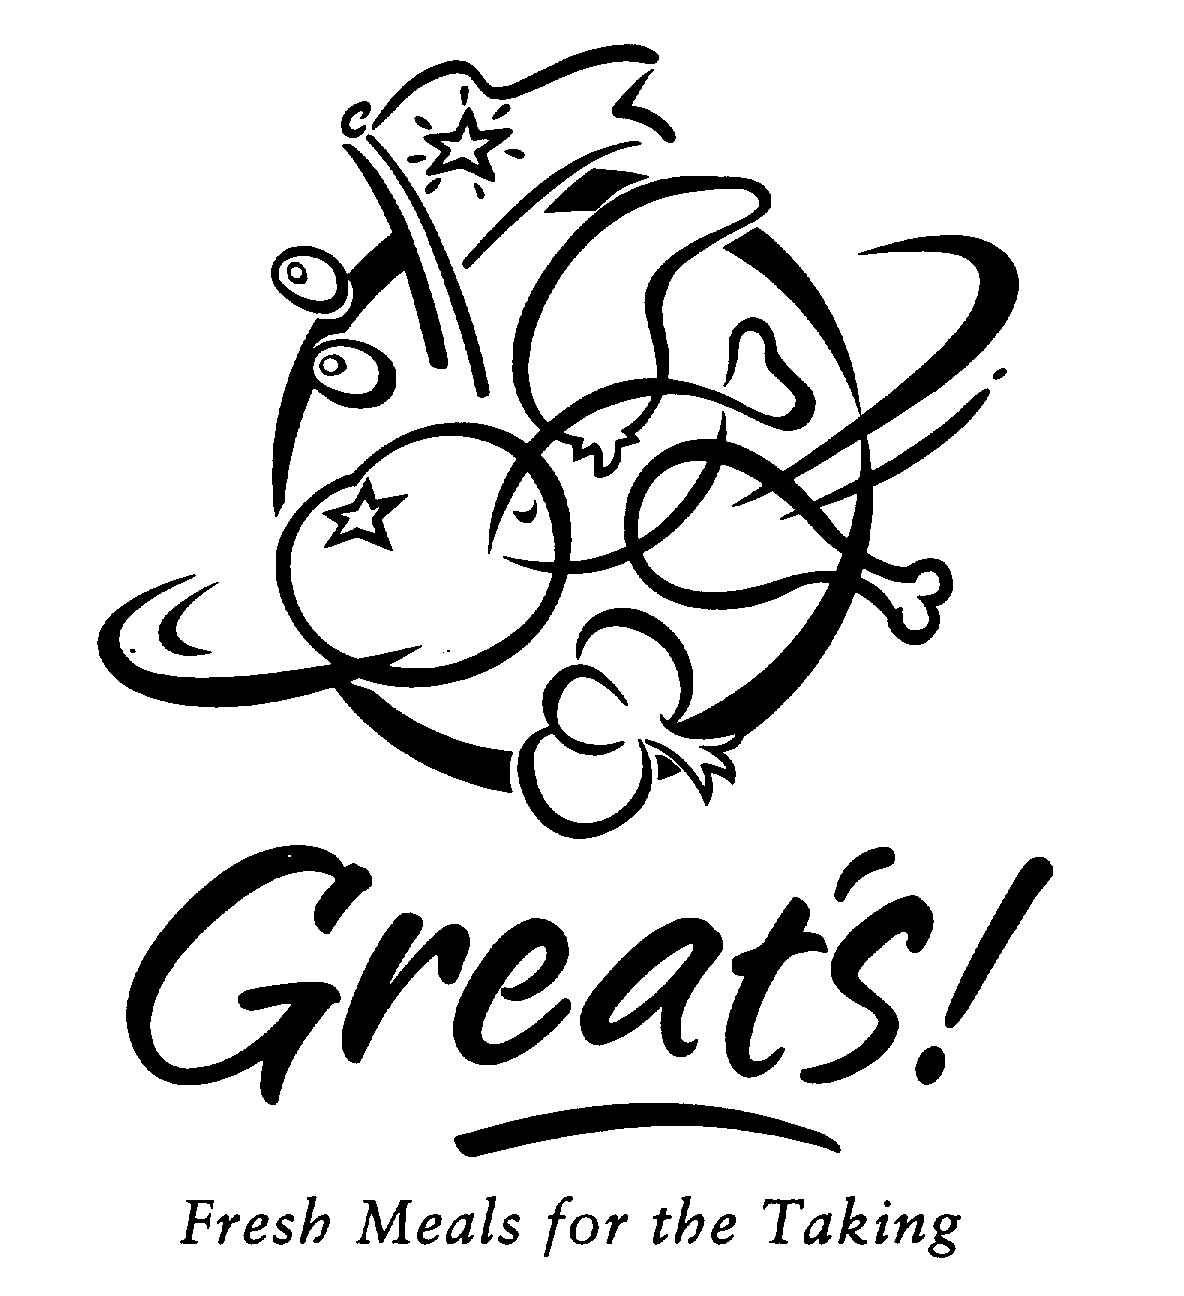 Trademark Logo GREAT'S! FRESH MEALS FOR THE TAKING